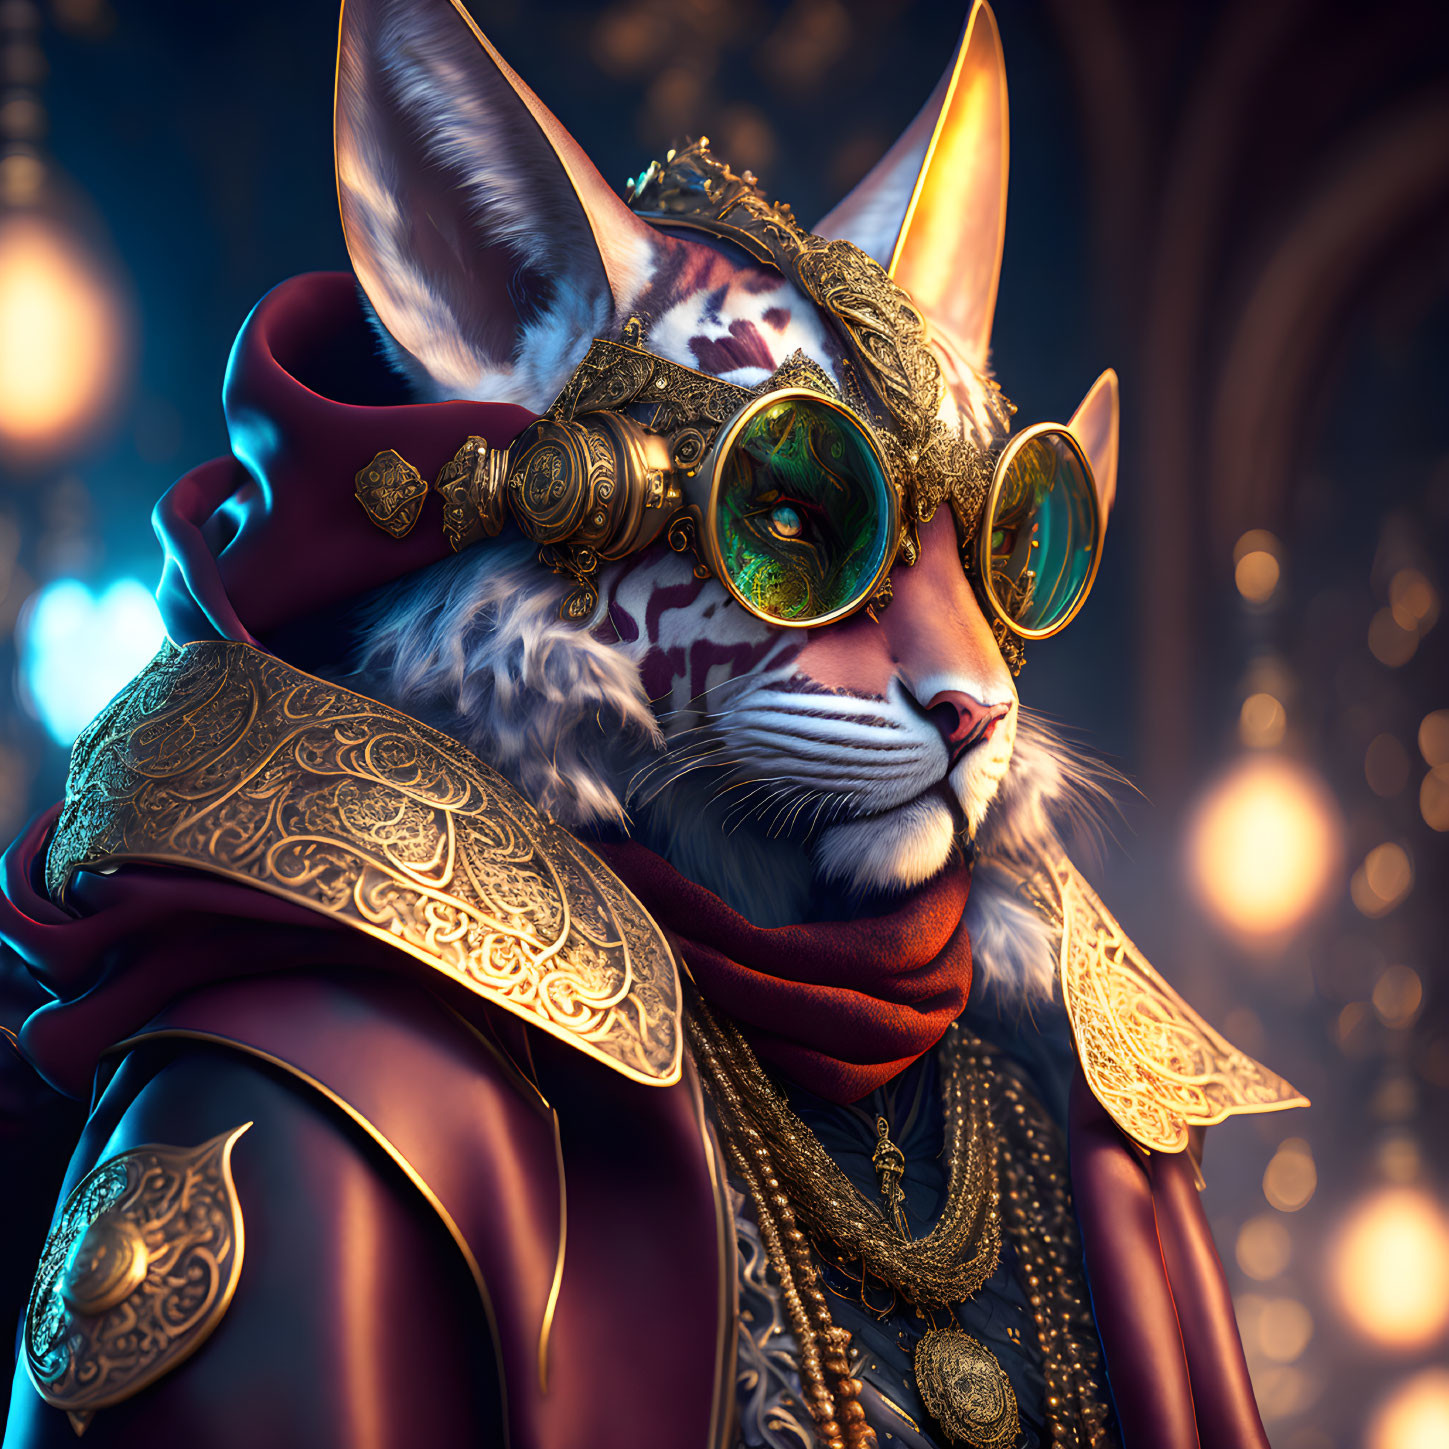 Regal anthropomorphic feline character in ornate golden goggles and attire against warm-toned backdrop